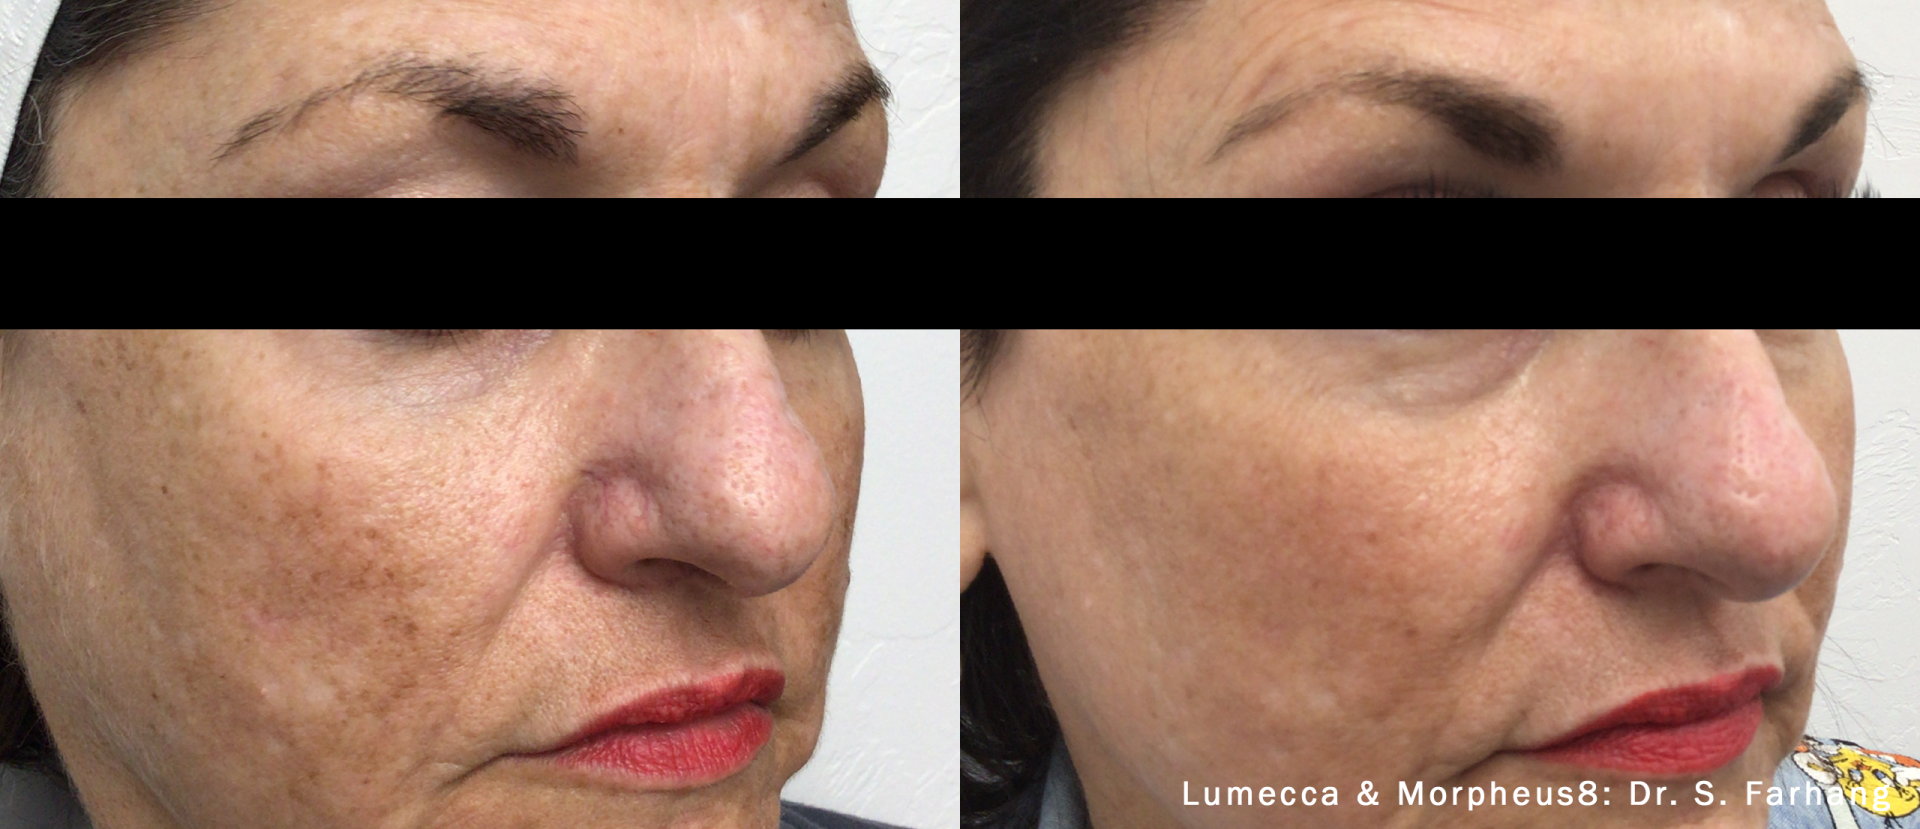 patient's face Before and After Morpheus8 Treatment, with FaceTite